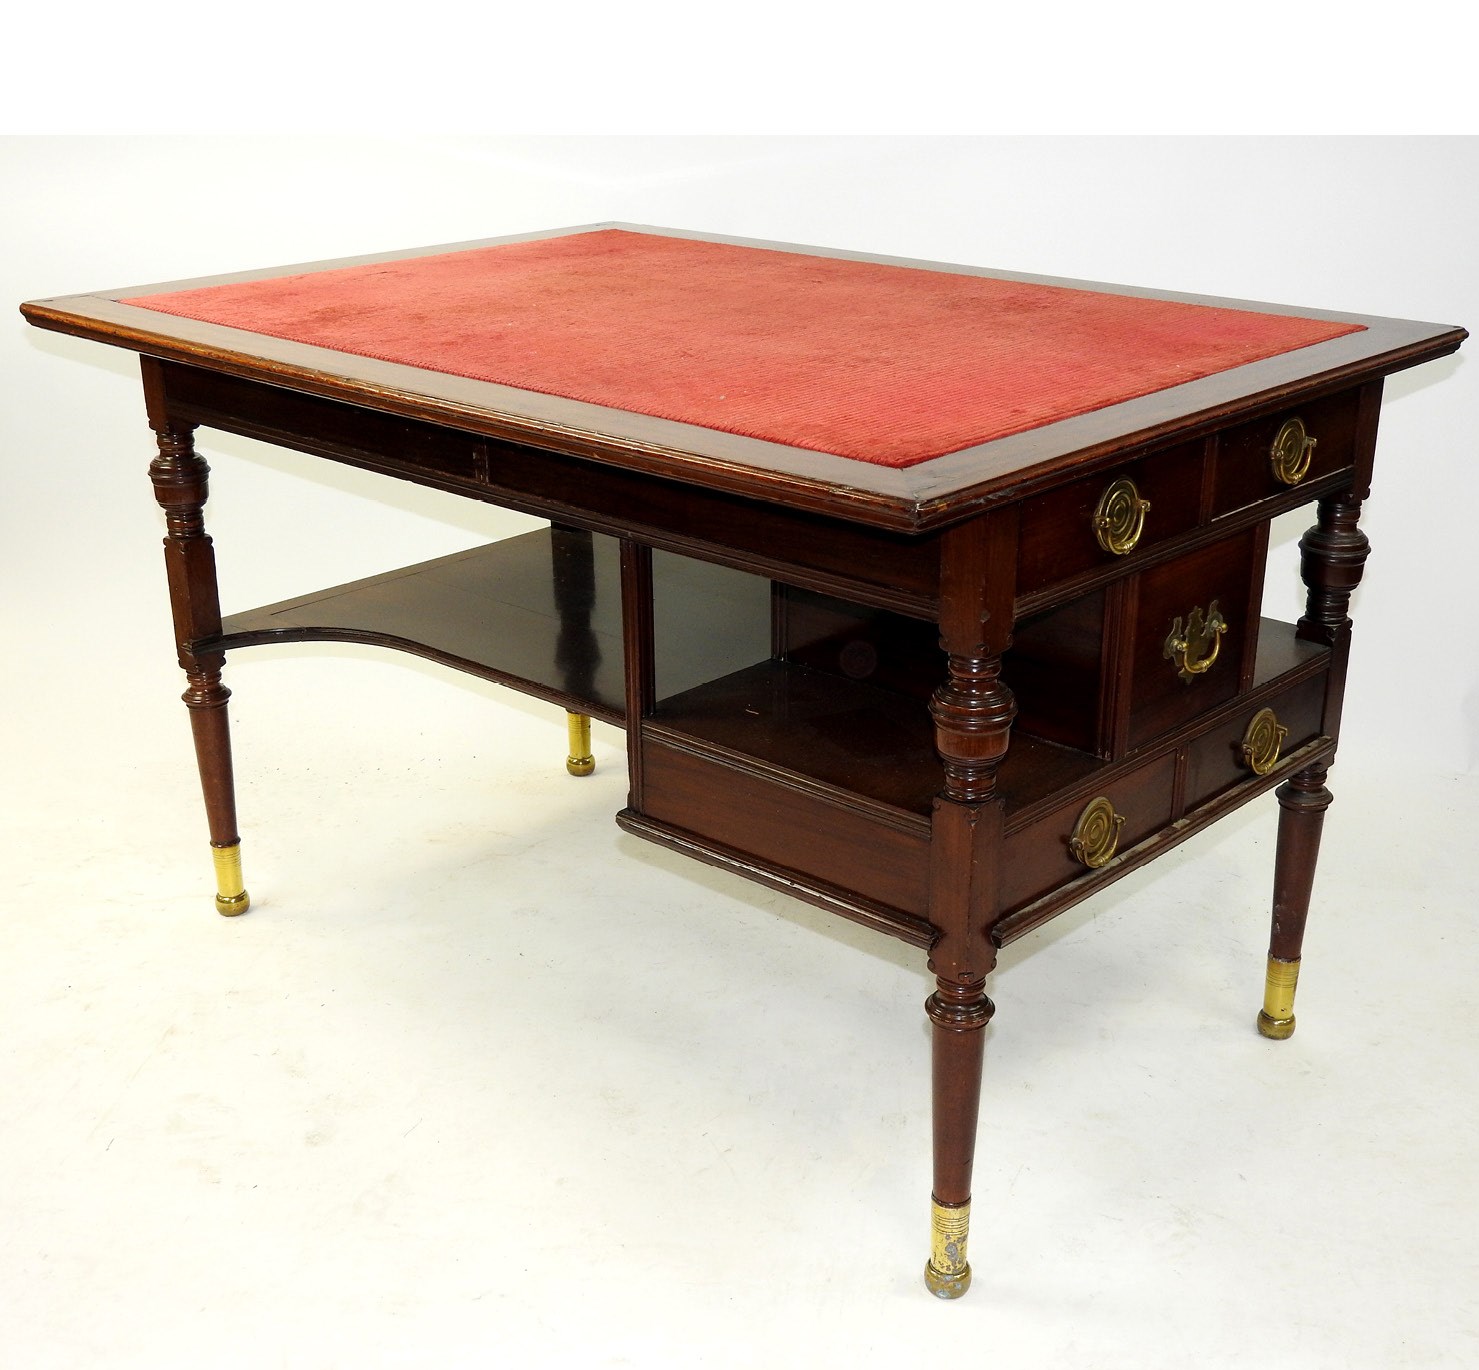 Lot 106 A Victorian aesthetic movement writing table, 19th century